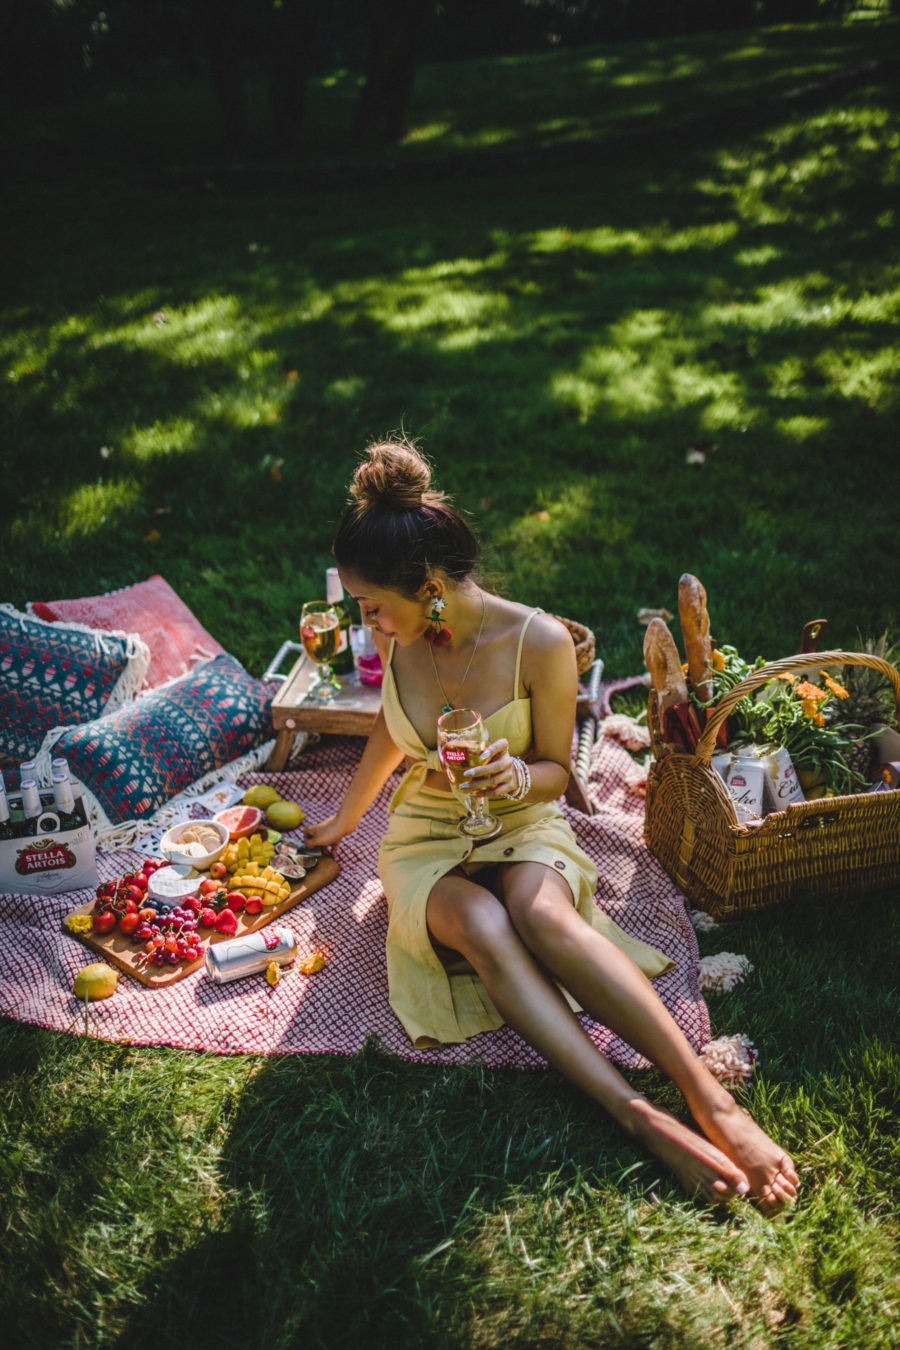 celebrate mother's day at home with a backyard picnic // Jessica Wang - Notjessfashion.com